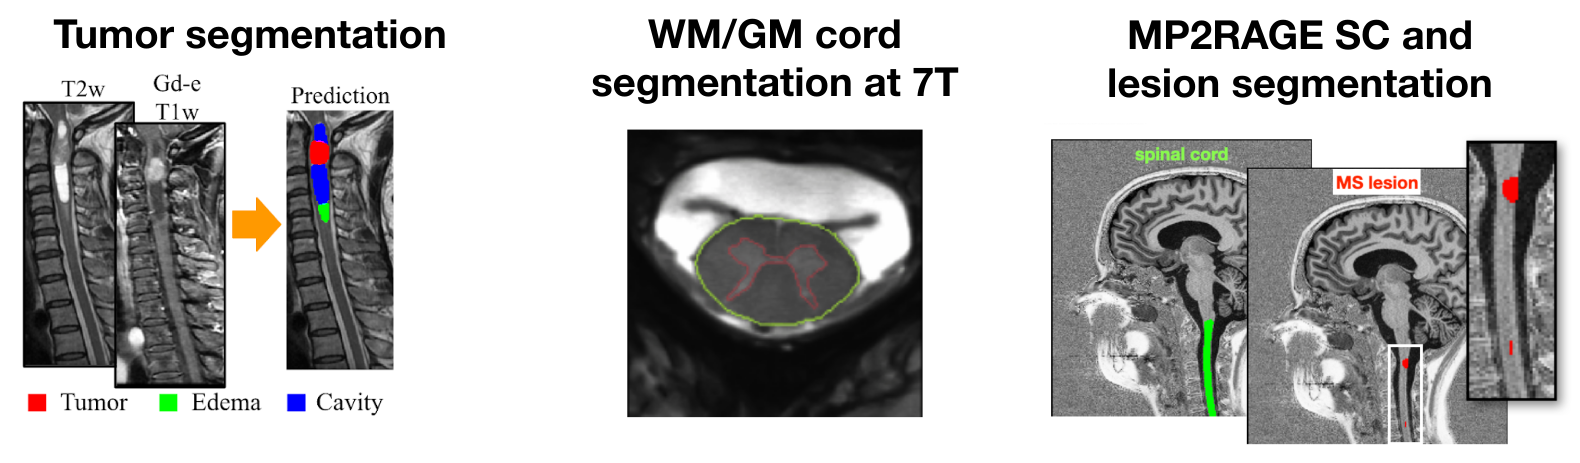 https://raw.githubusercontent.com/spinalcordtoolbox/doc-figures/master/spinalcord-segmentation/sct_deepseg_models.png